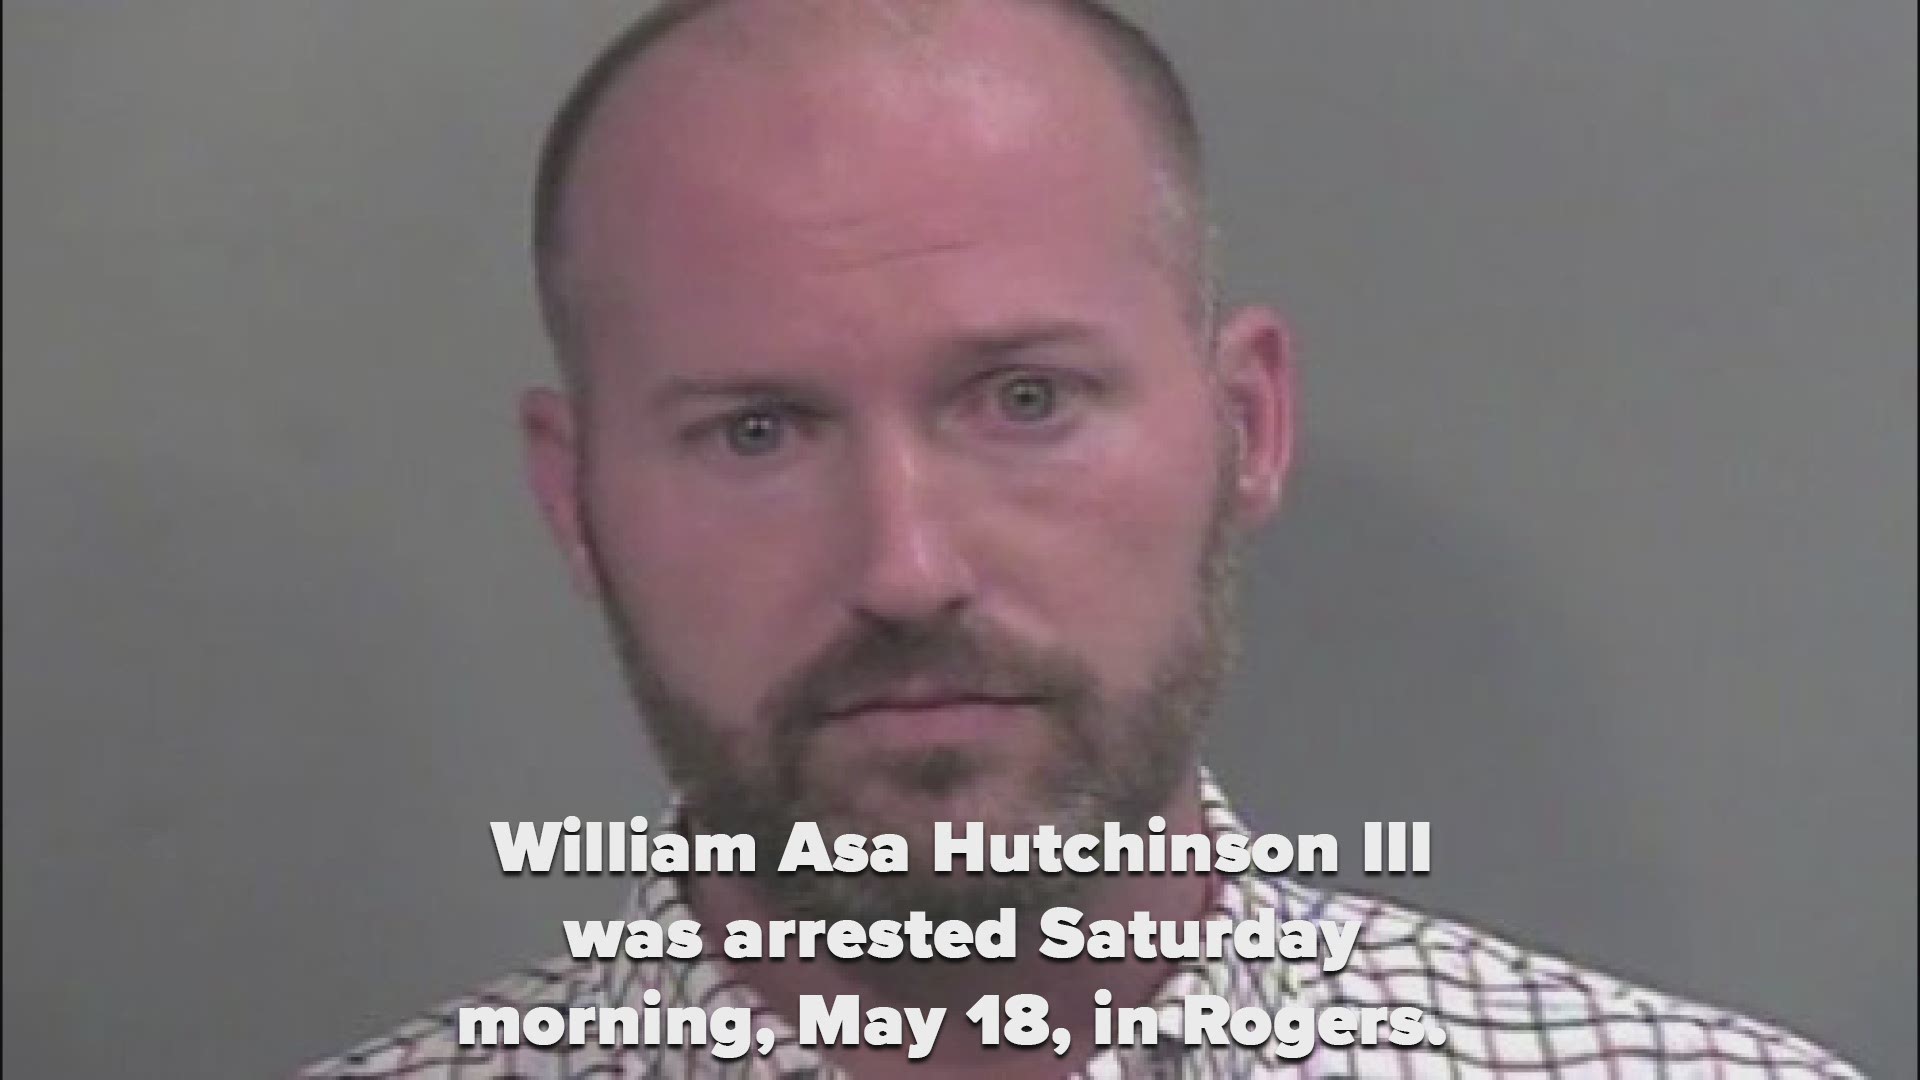 William Asa Hutchinson III was arrested Saturday morning, May 18, in Rogers.